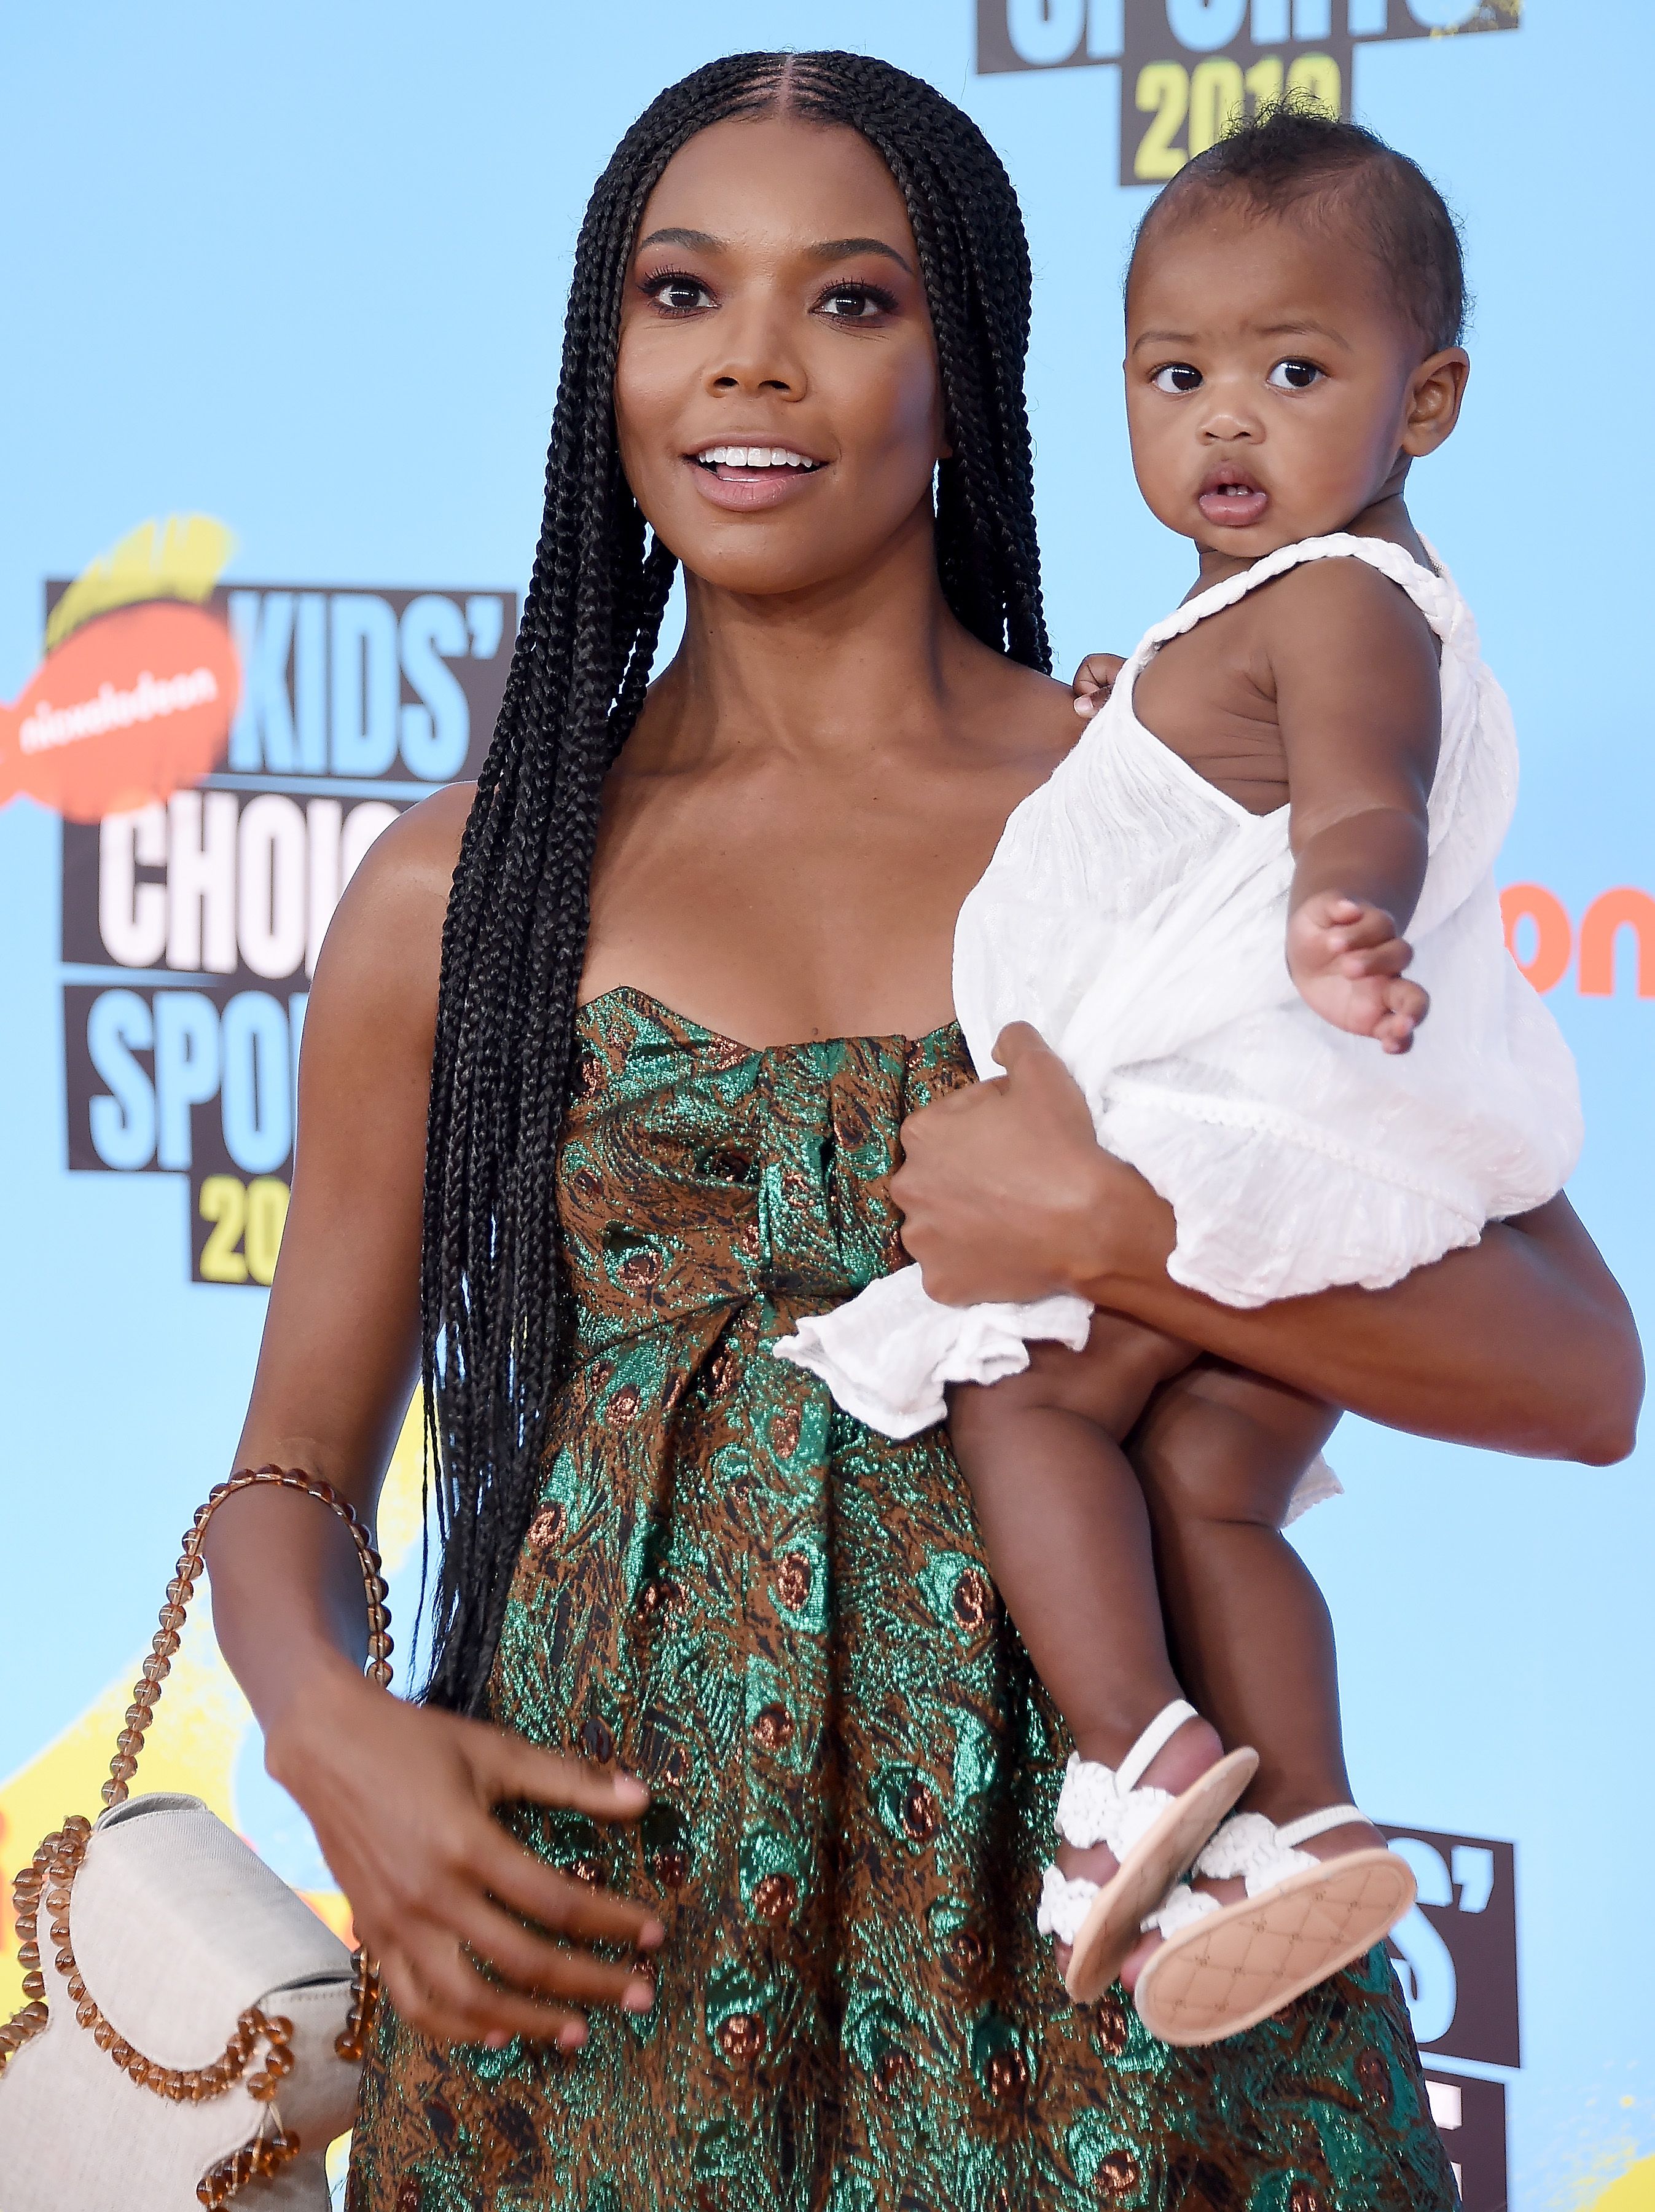 Gabrielle Union and her daughter Kaavia Wade at Nickelodeon Kids' Choice Sports 2019 on July 11, 2019. | Photo: Getty Images